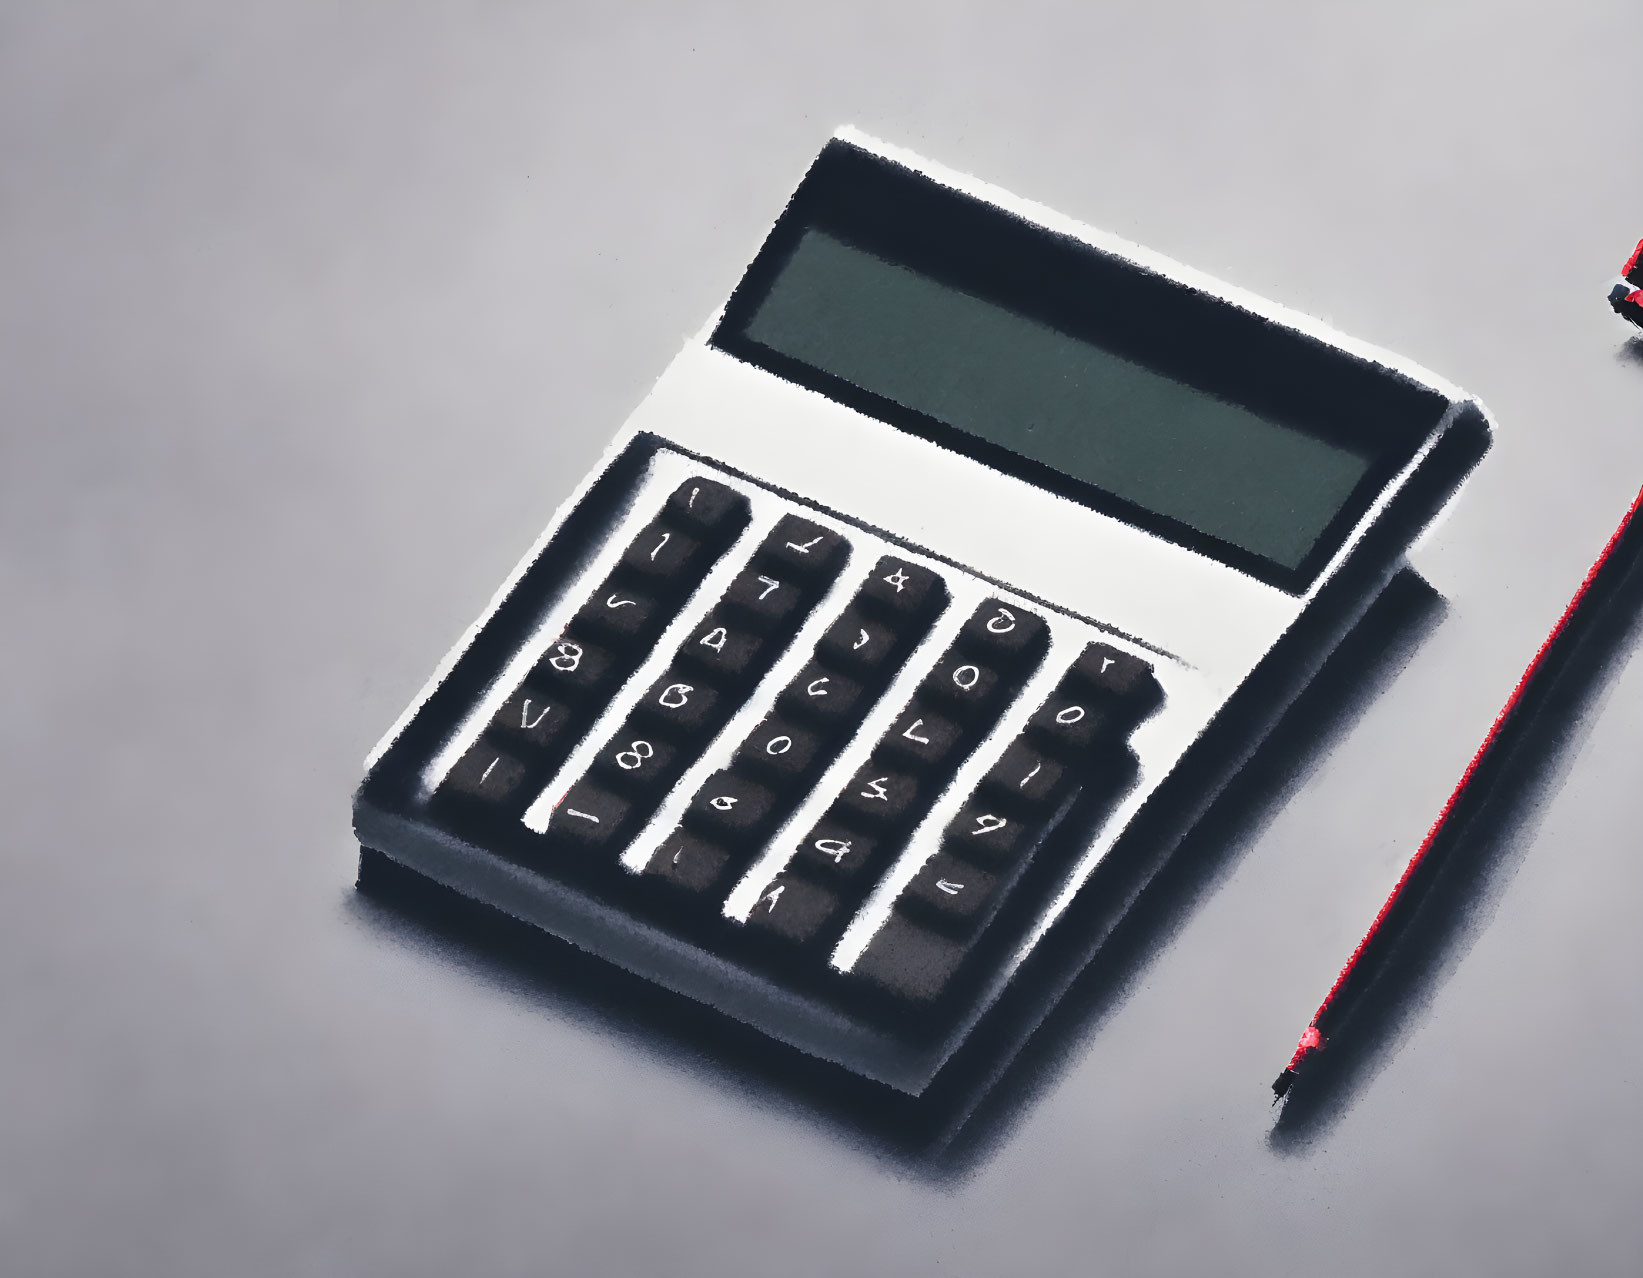 Electronic calculator and red pencil on gray surface with empty screen.